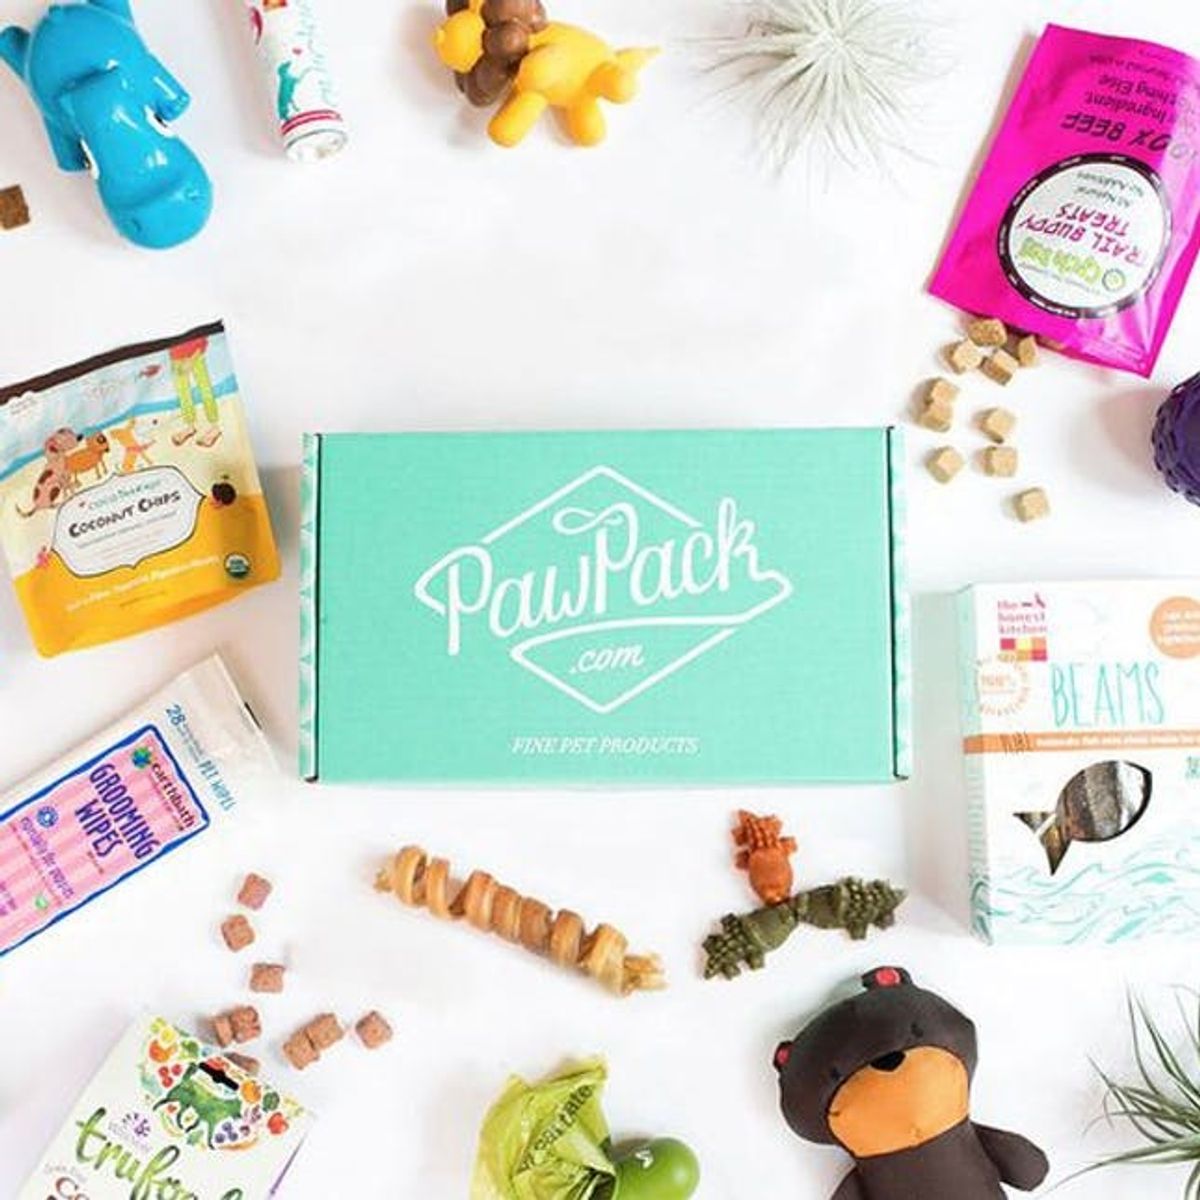 26 Subscription Gifts for Everyone on Your List